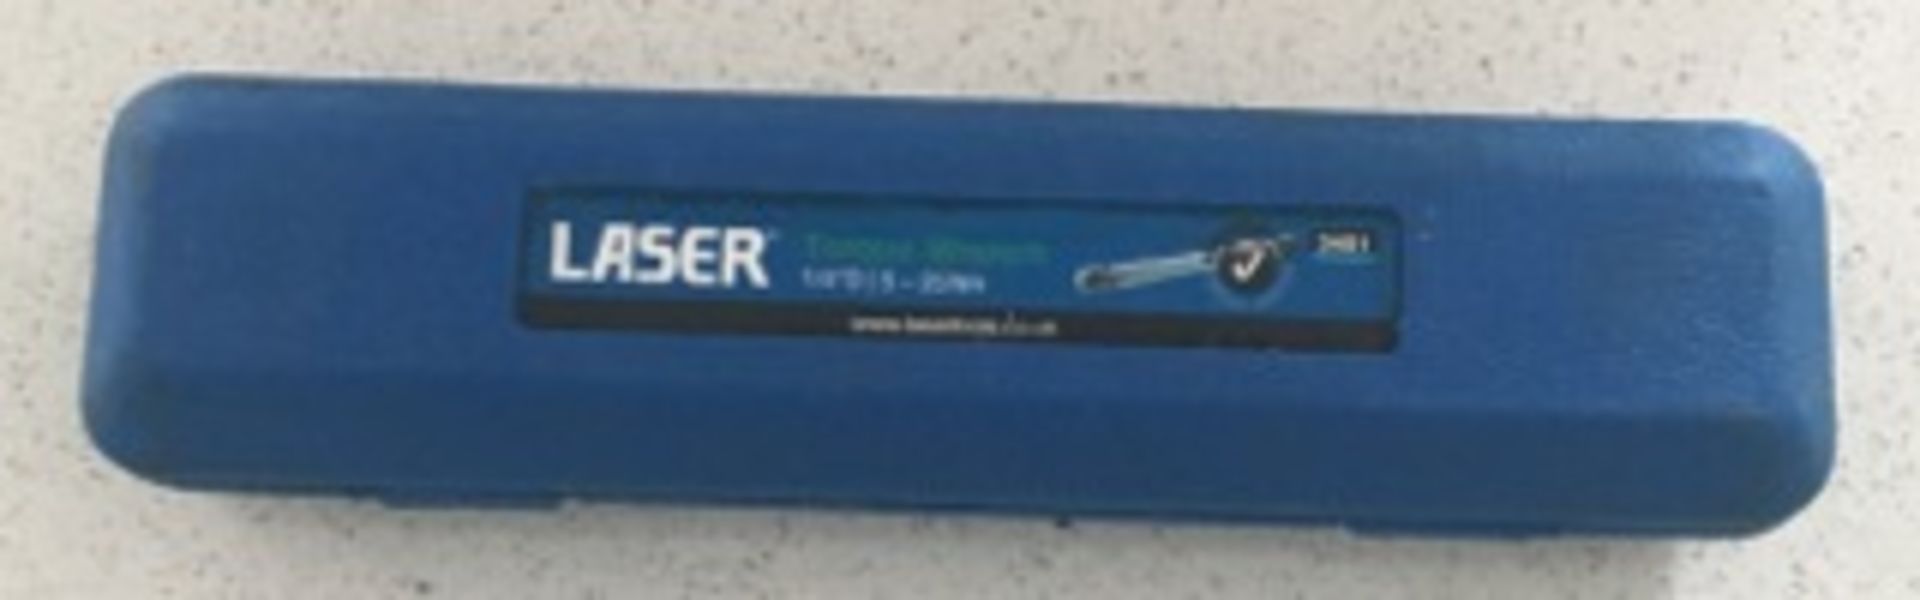 Laser Torque Wrench 5-25nm - Image 2 of 2